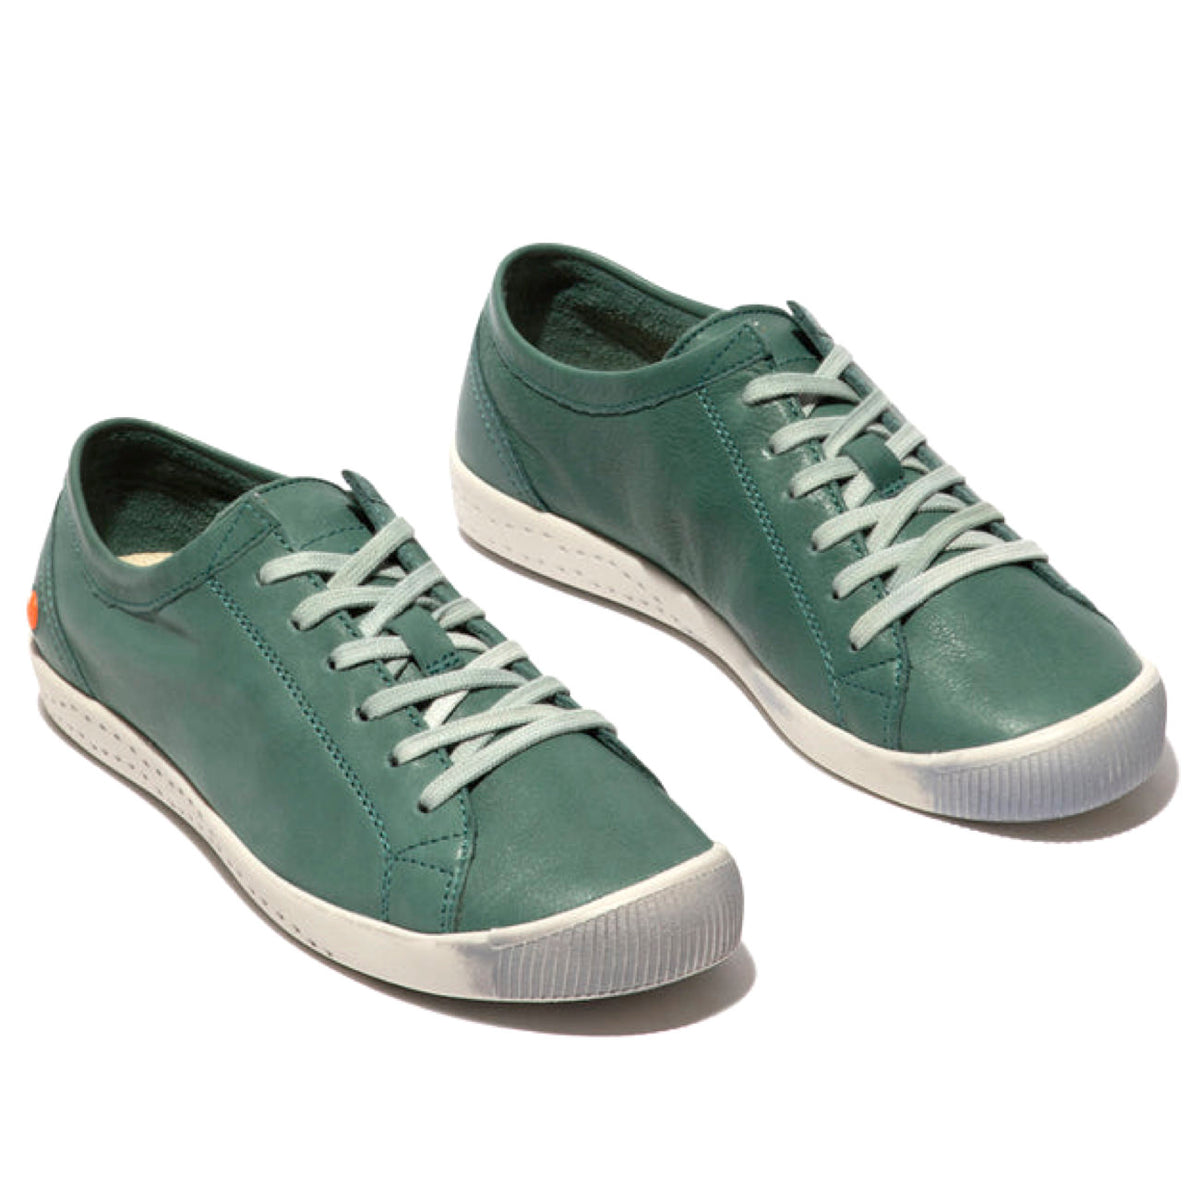 Softinos, Isla154, Laceup Shoe, Washed Leather, Green